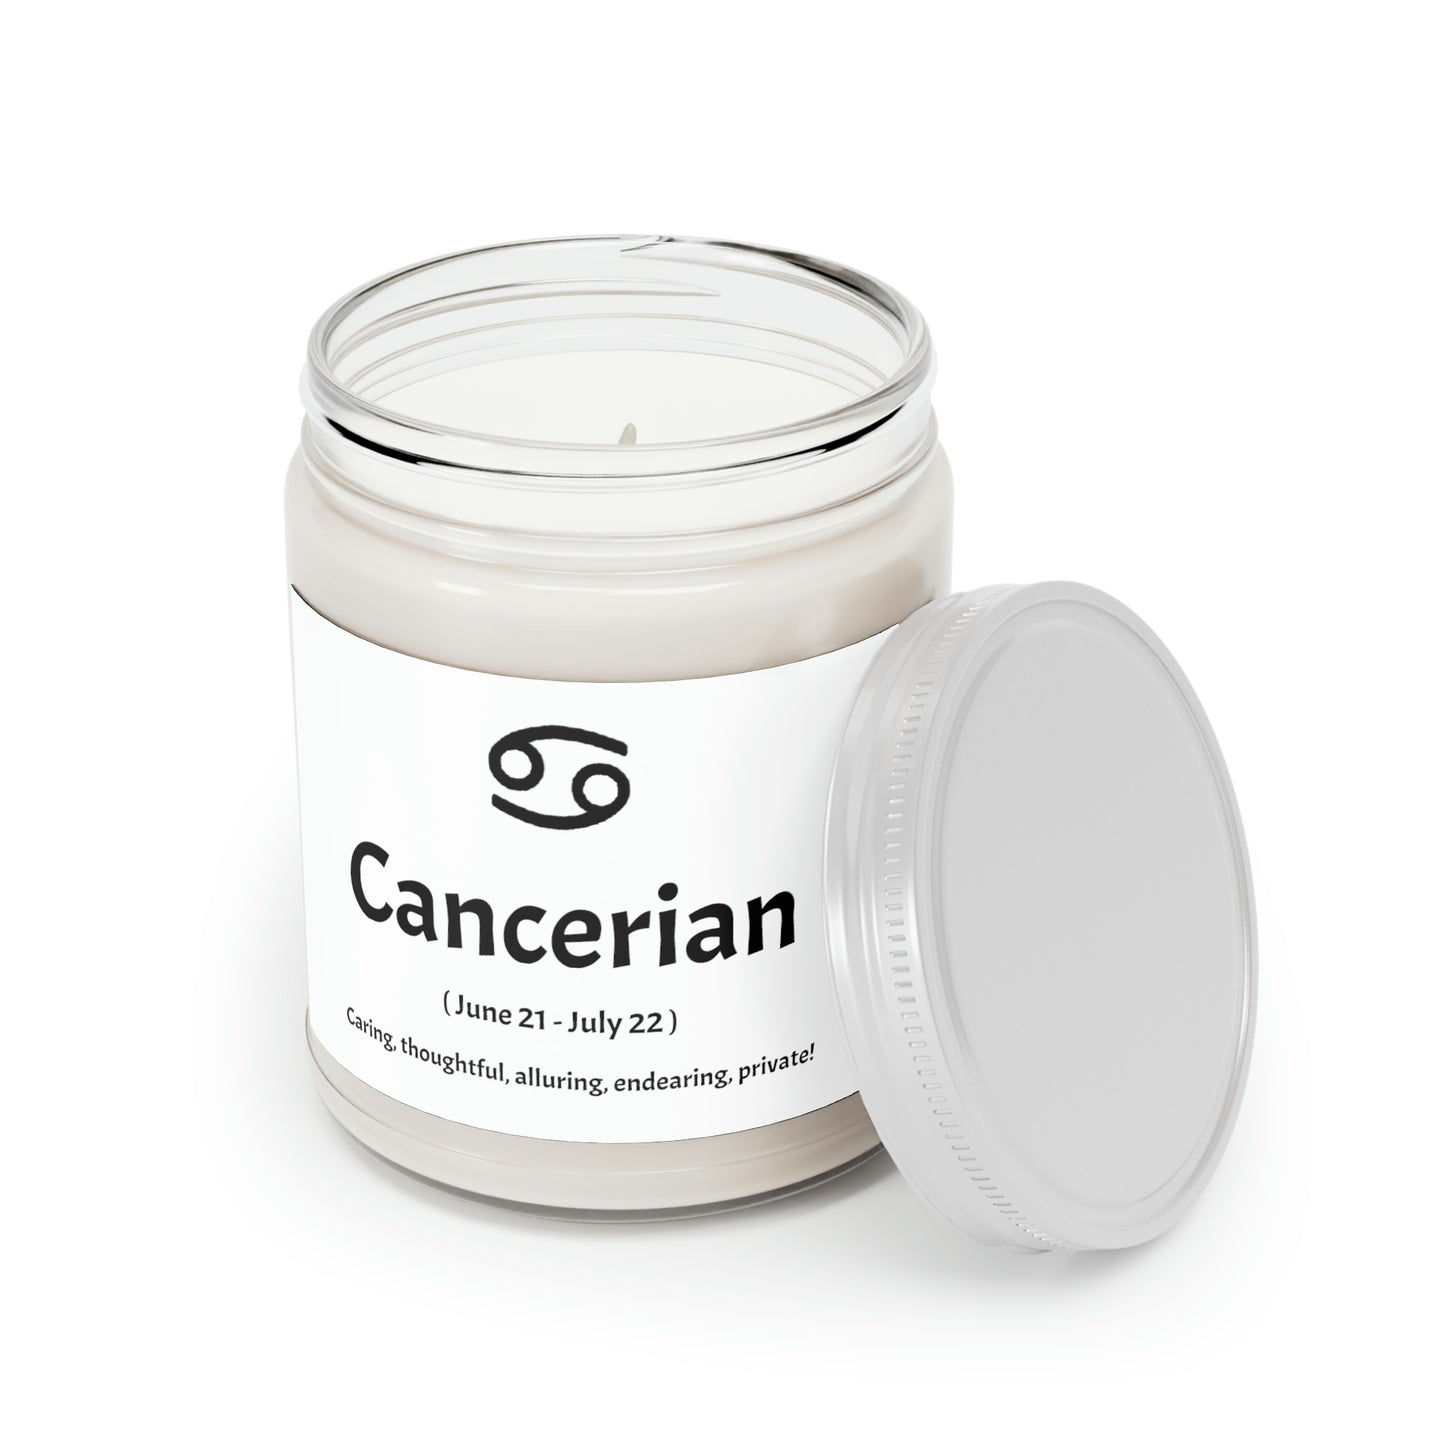 Cancerian Scented Candle